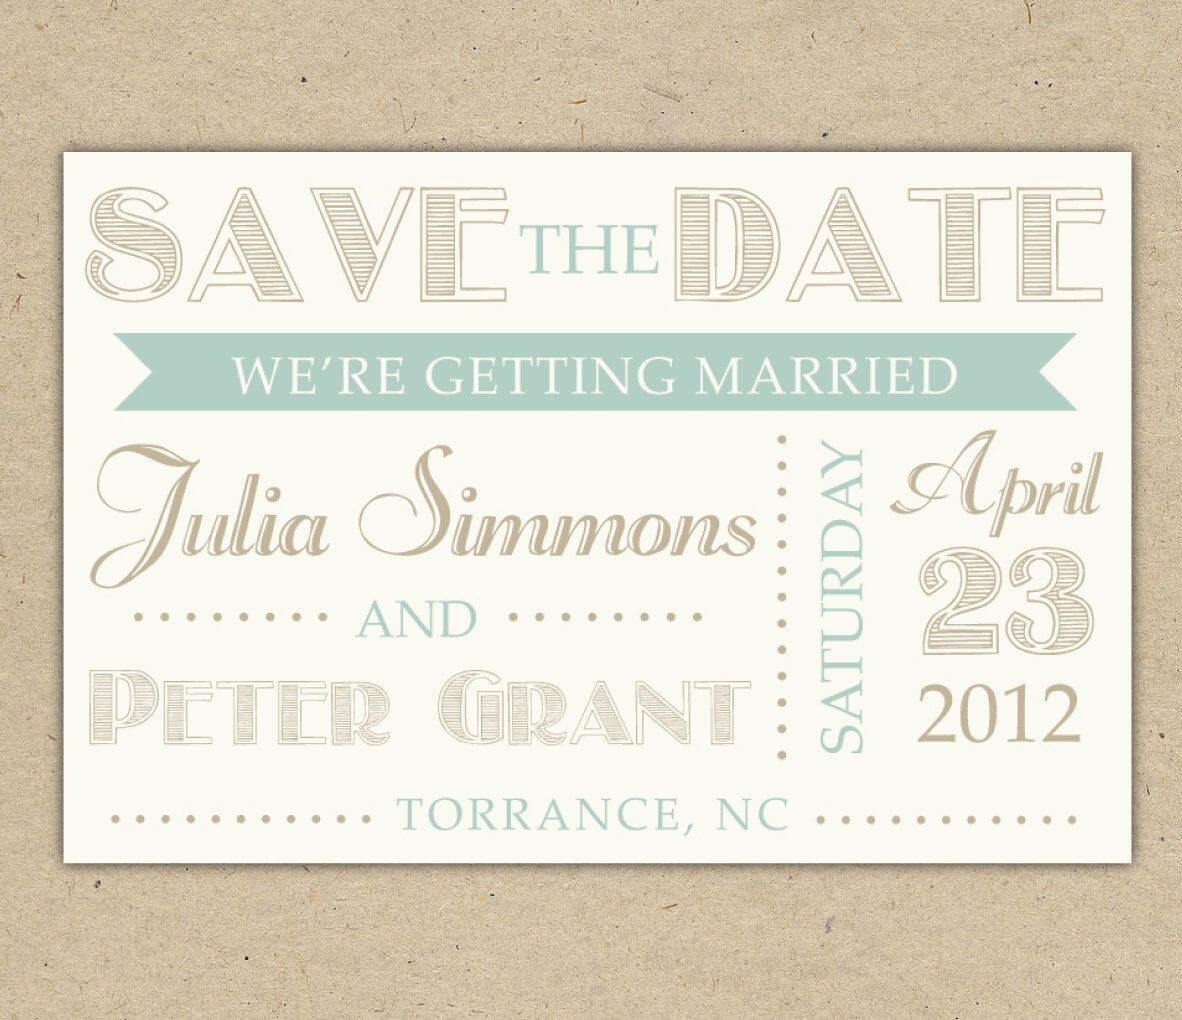 Save The Date Cards Templates For Weddings | Save The Date Within Save The Date Cards Templates